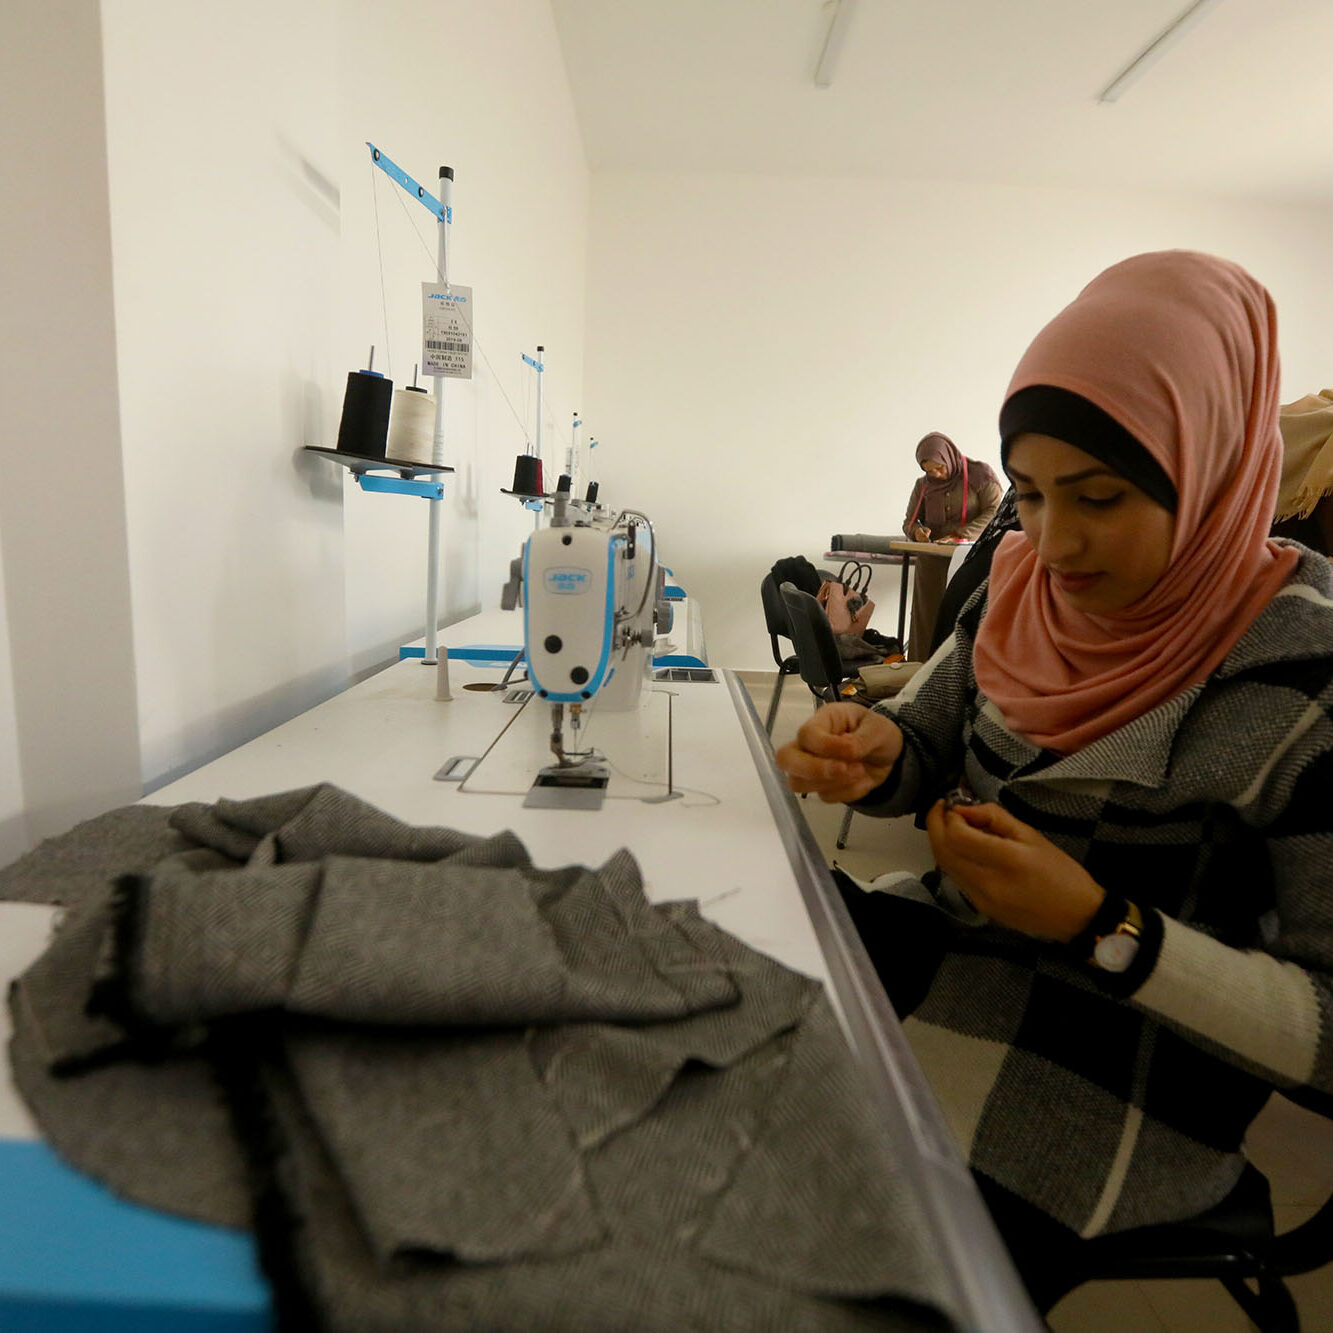 A Palestinian woman readies a spool of thread to add to her sewing machine as part of an Anera sewing training course at the CSSL center in Beit Hanoun, Gaza.